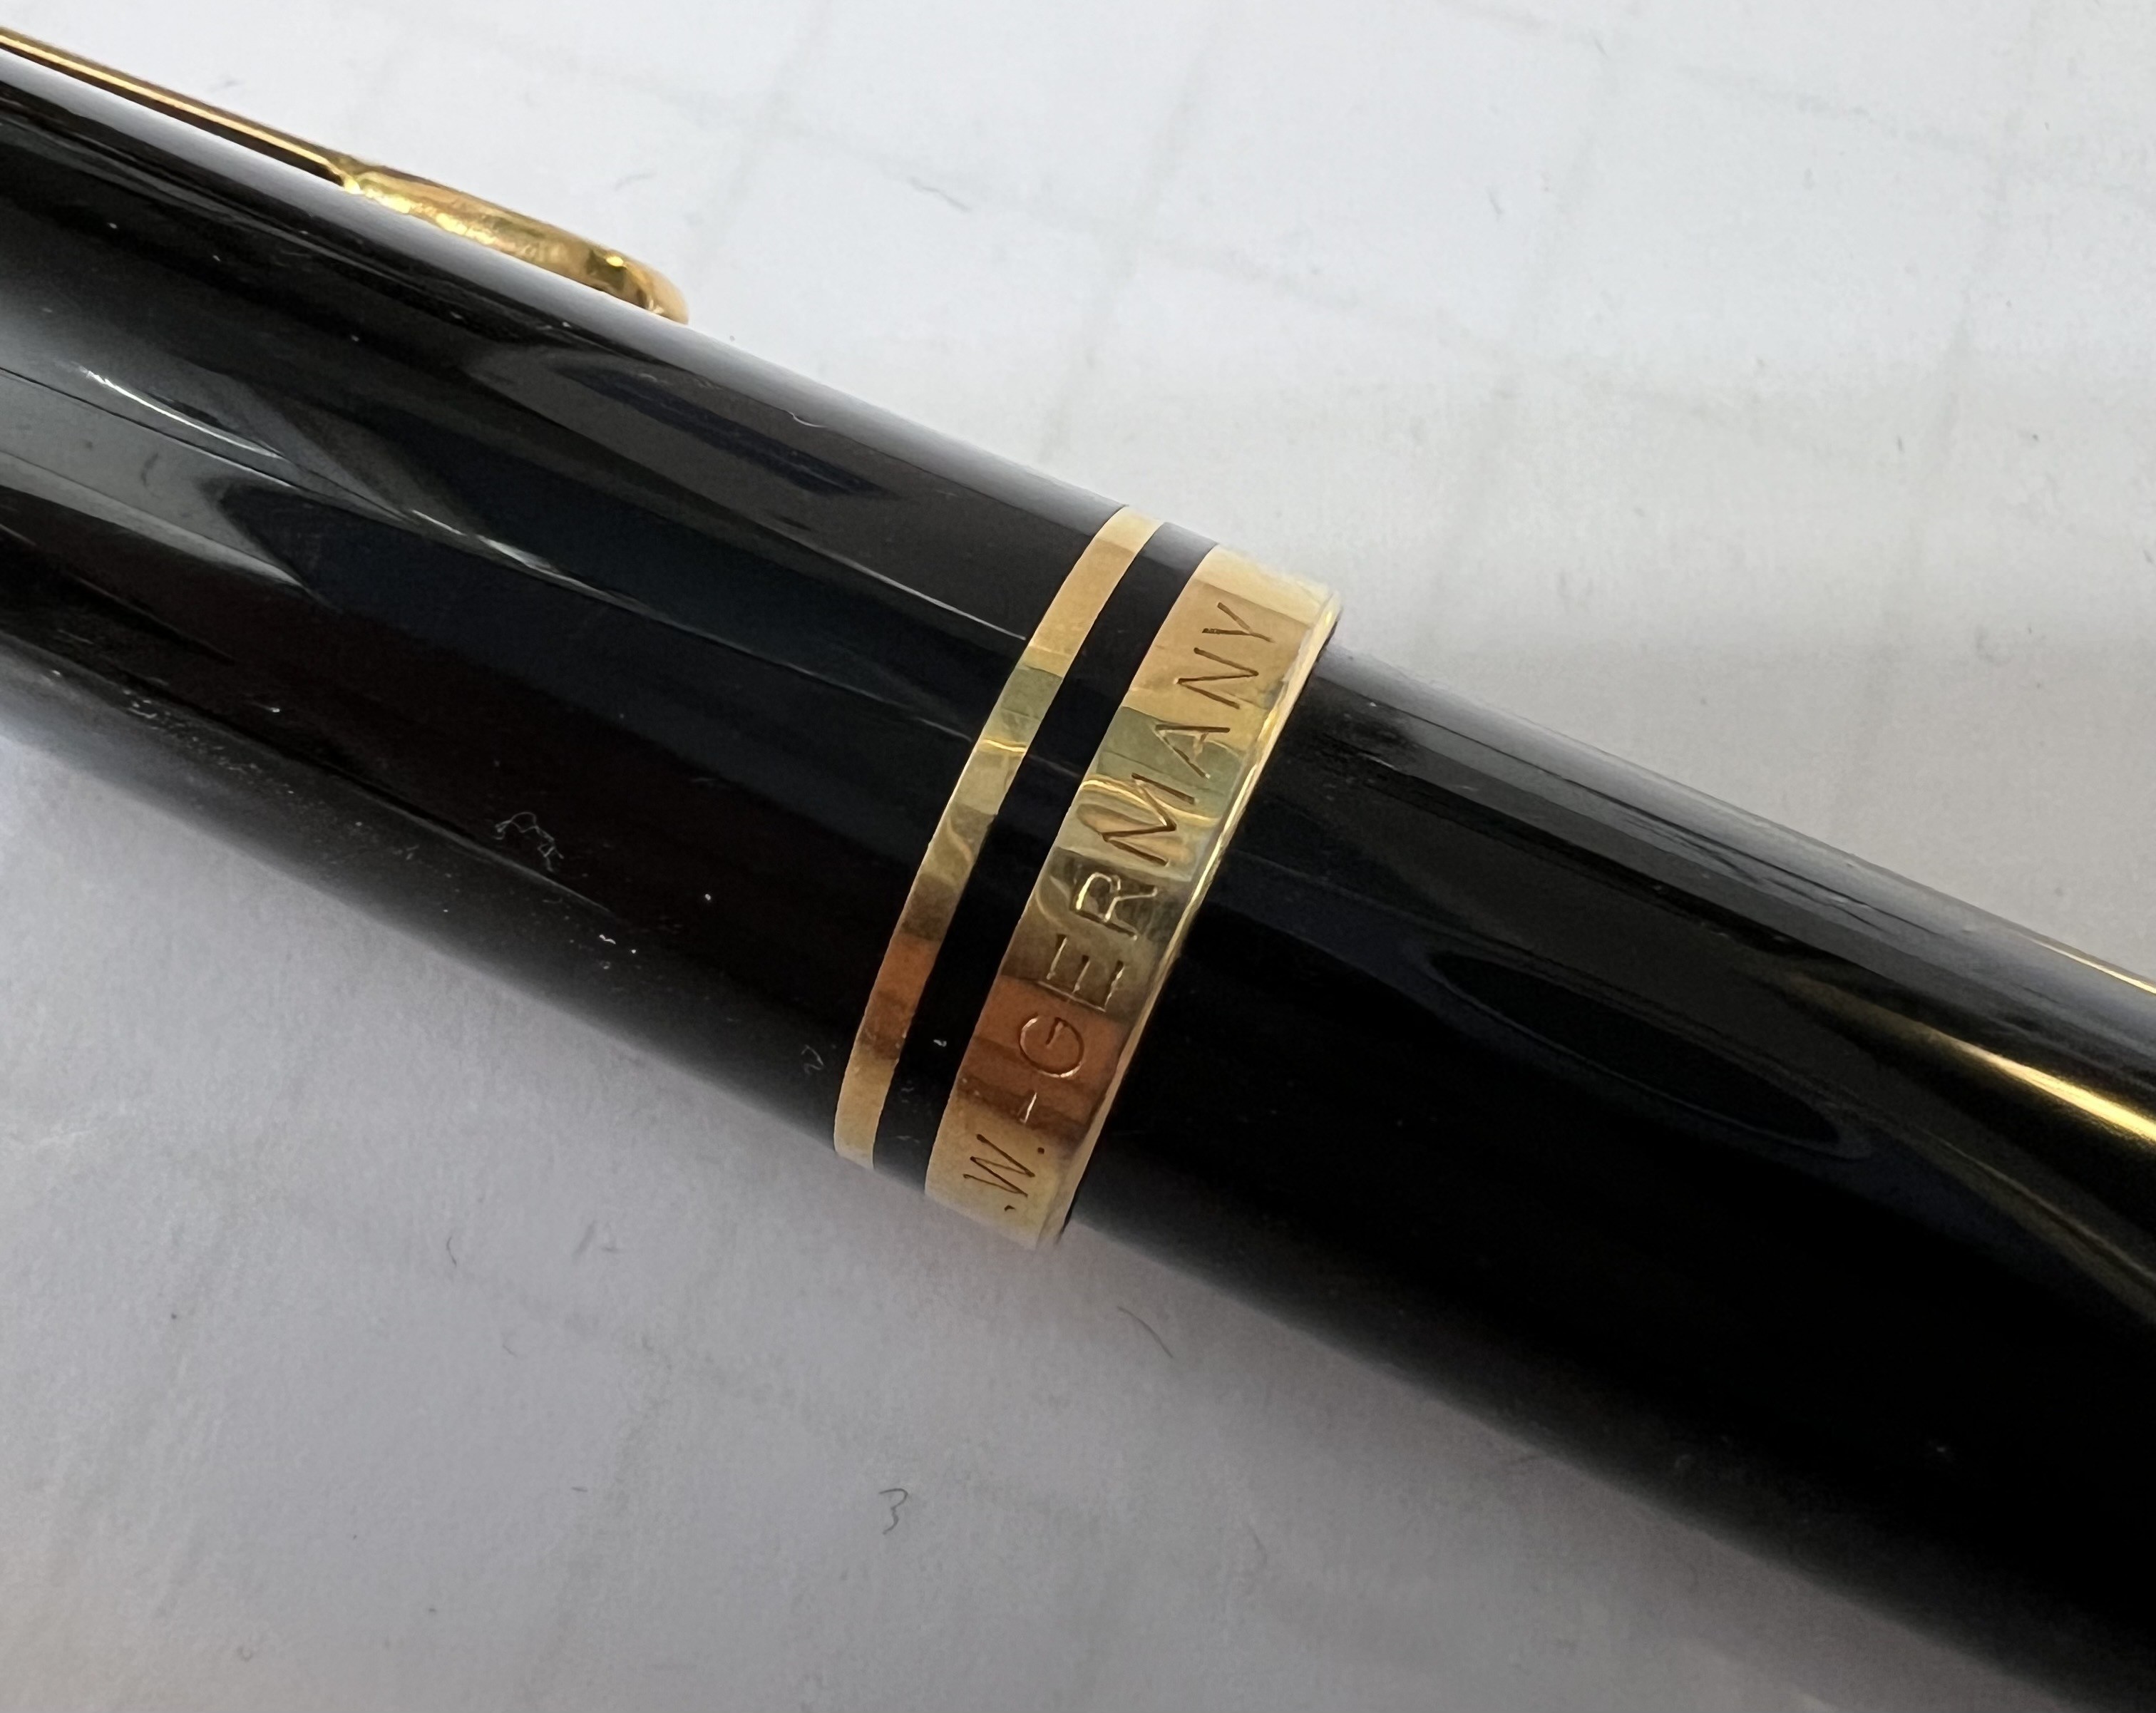 Closeup of W. Germany imprint (dates this pen to c. 1988)